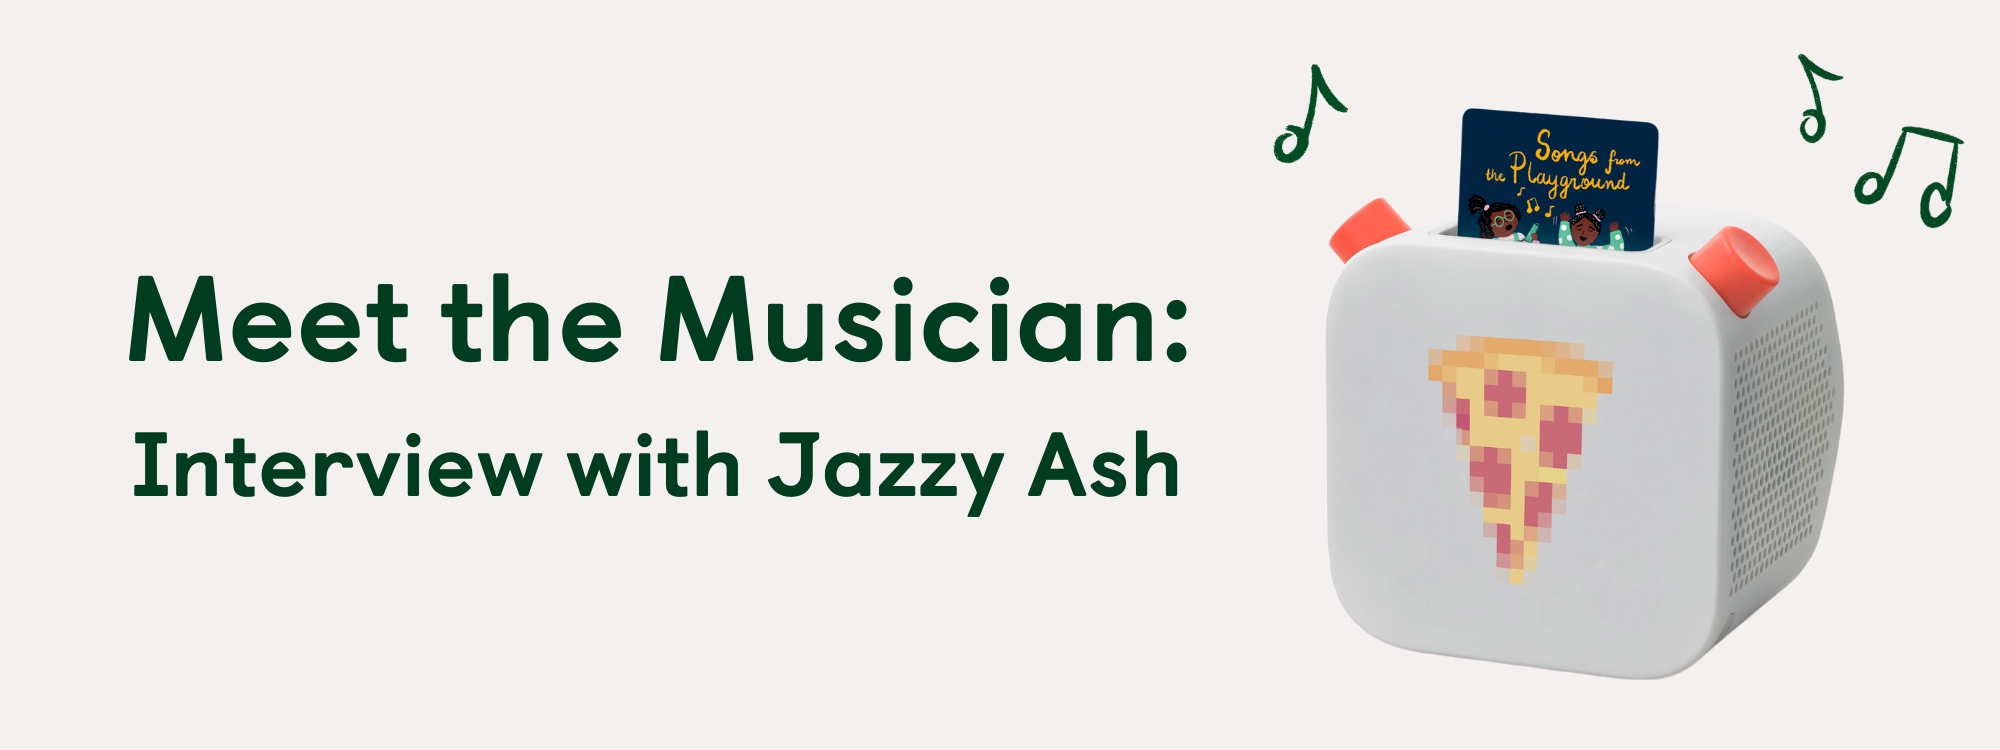 Meet The Musician: Interview with Jazzy Ash